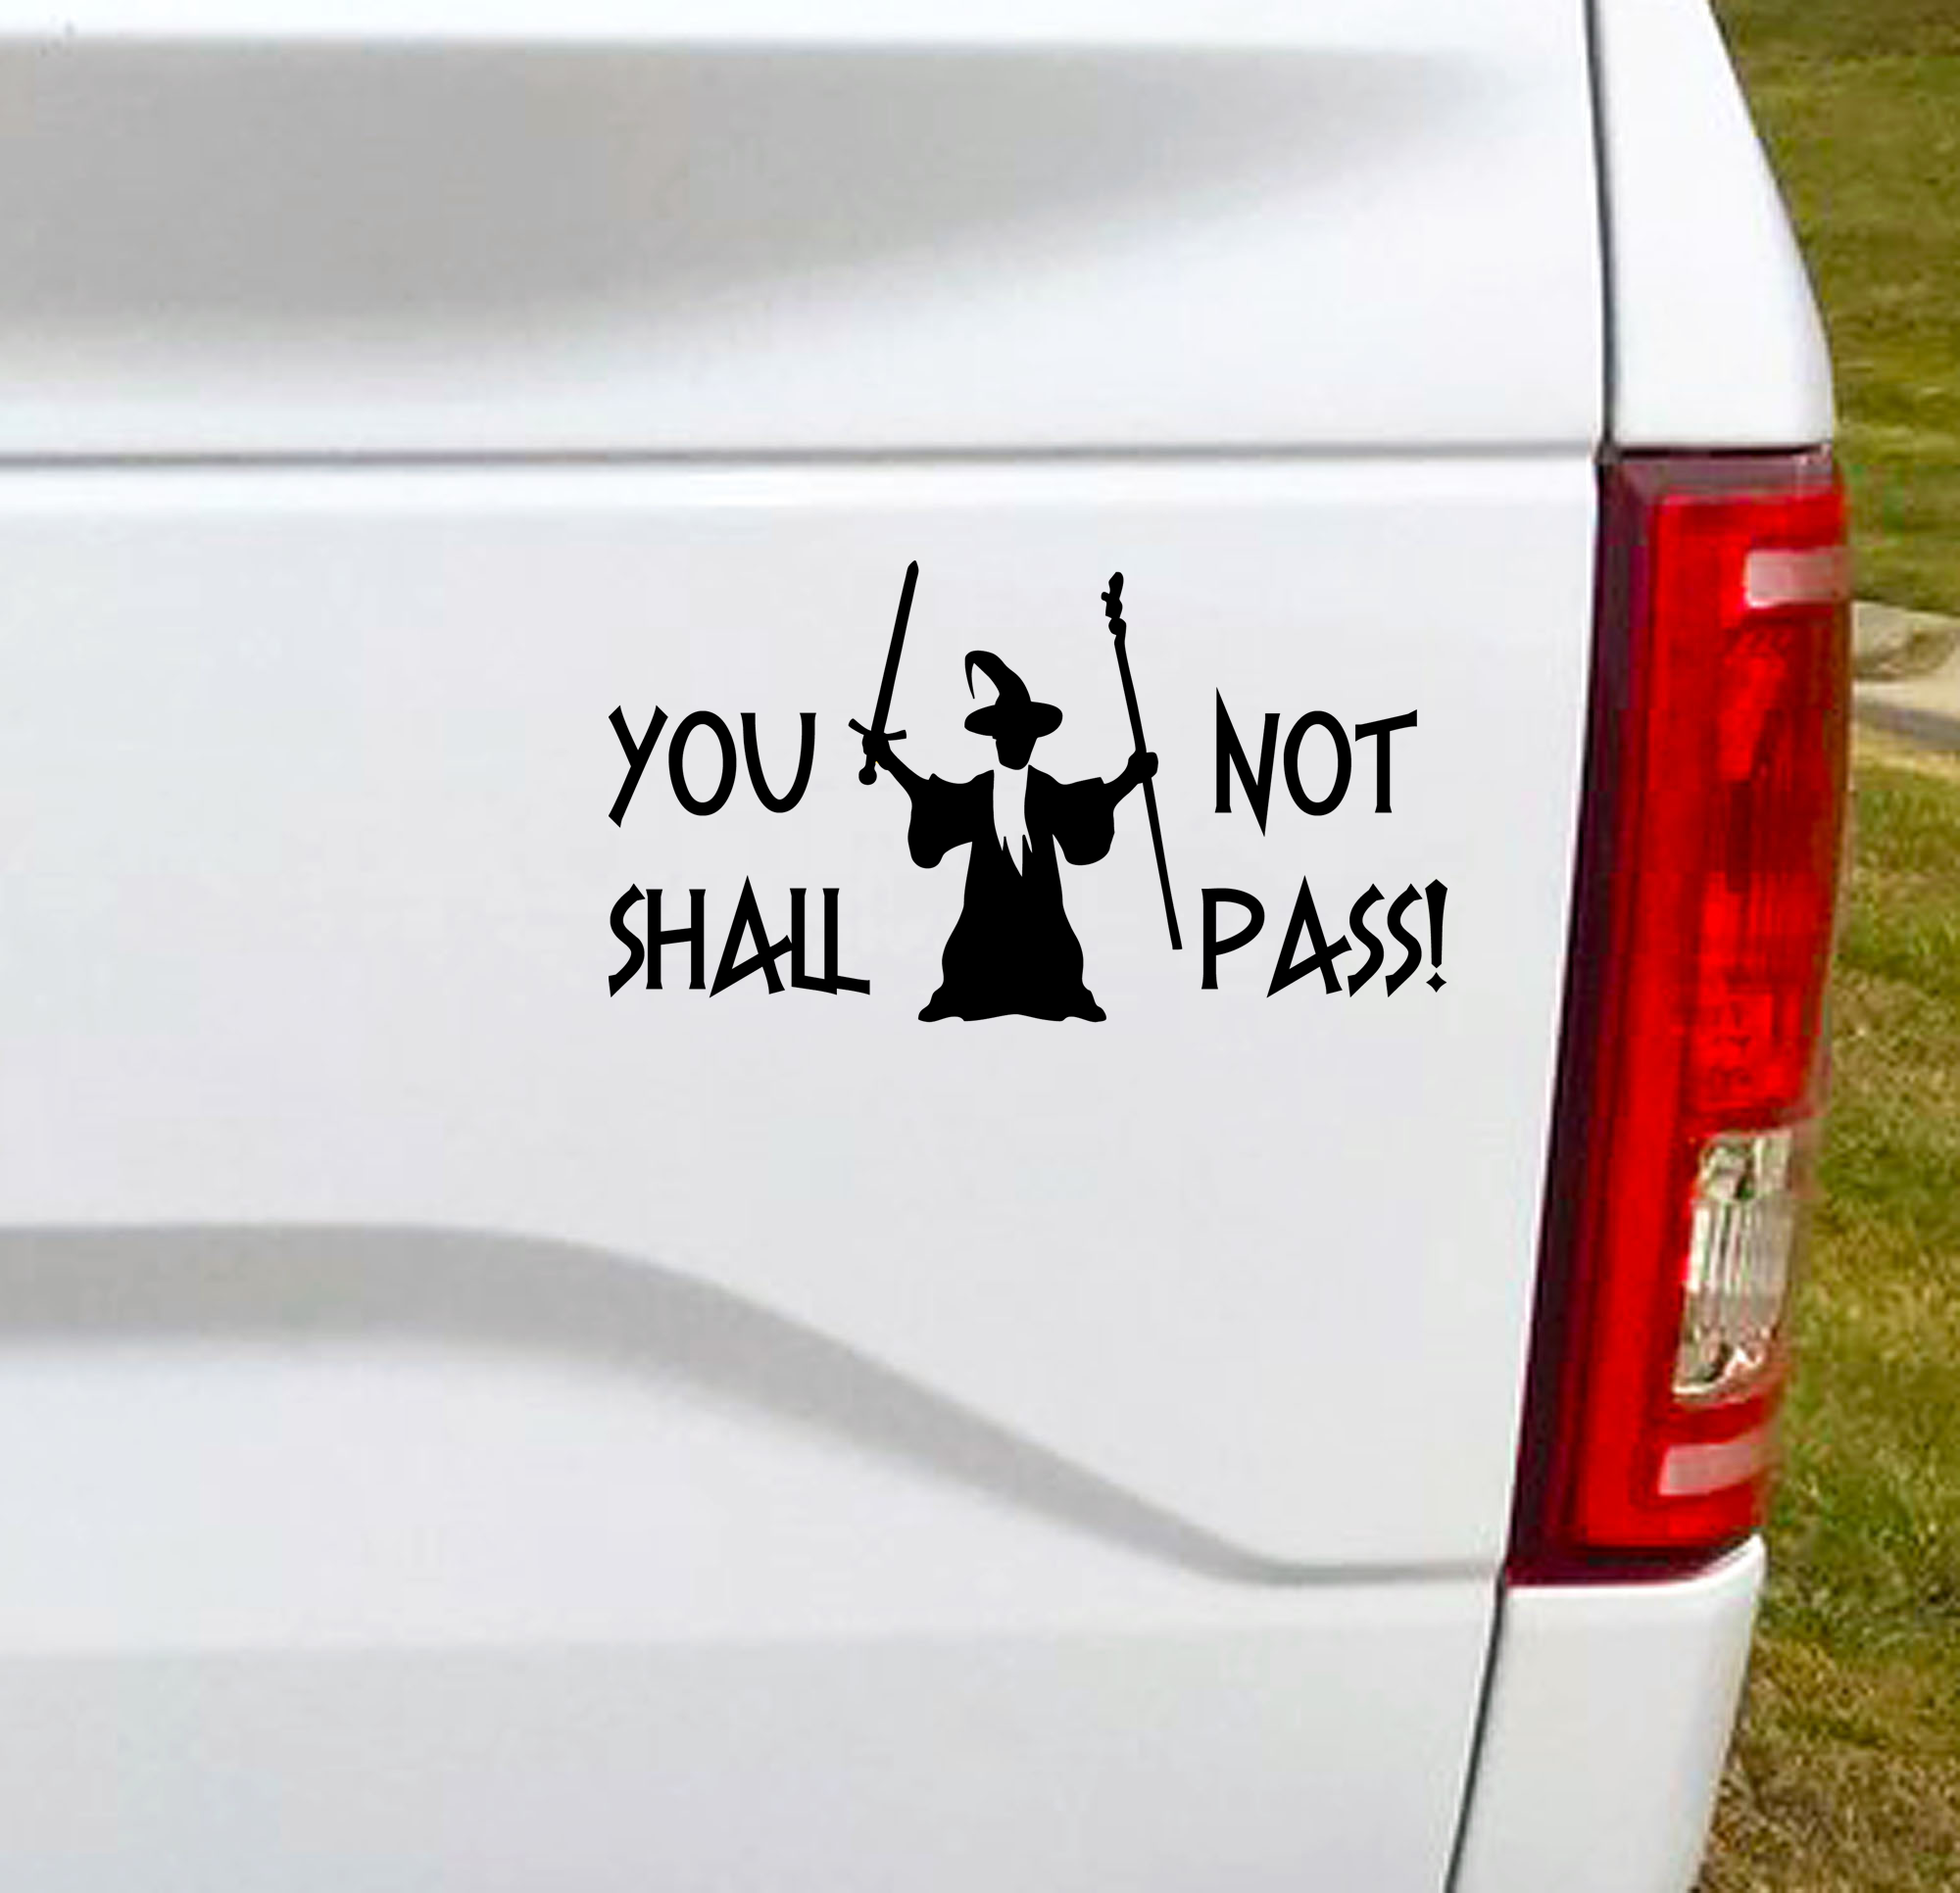 You Shall Not Pass - Vinyl Car Decal Bumper Sticker. For the movie fan that wants to be a little cheeky. This car decal will put a smile on the faces of the people behind you on the road.  6.5"W x 3.5"H Car Decal, Car Sticker, Car Vinyl, Bumper Sticker, Vinyl Stickers, Vinyl Sticker. Lord of the Rings.